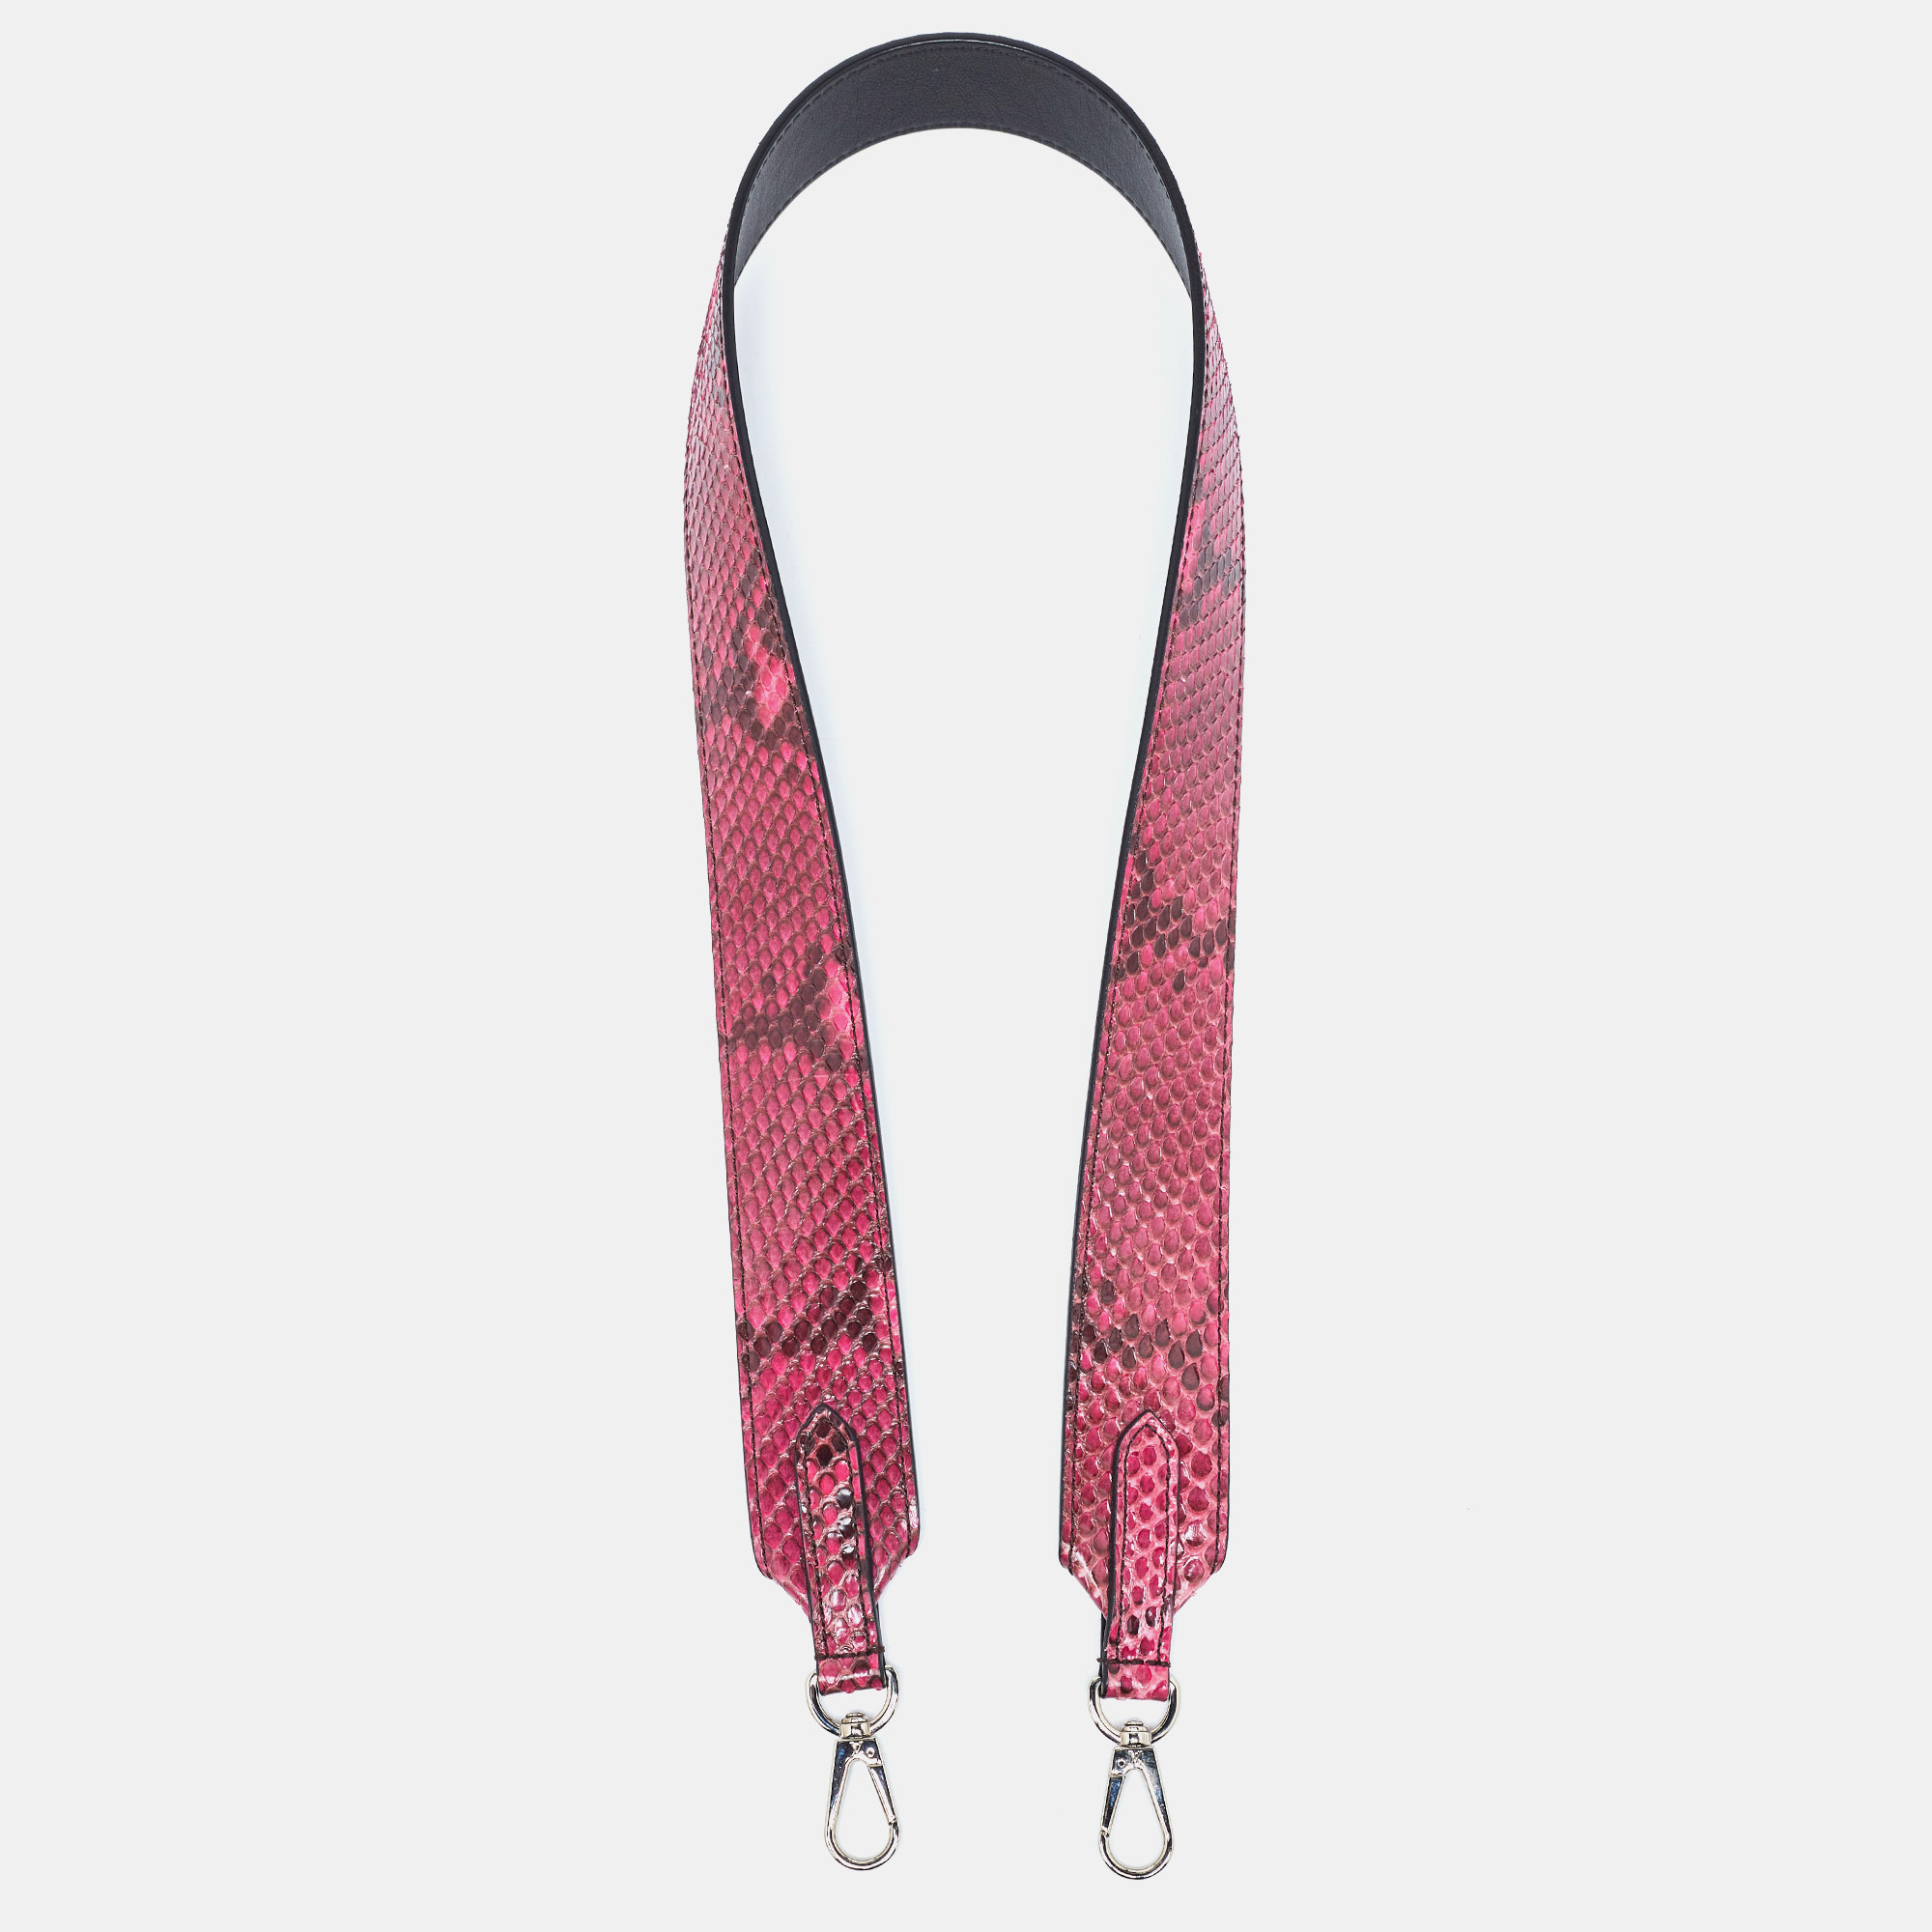 This shoulder strap from the House of Louis Vuitton is a practical investment to make. It has been crafted using leather with distinct hardware. Complement your LV handbags with this shoulder strap.